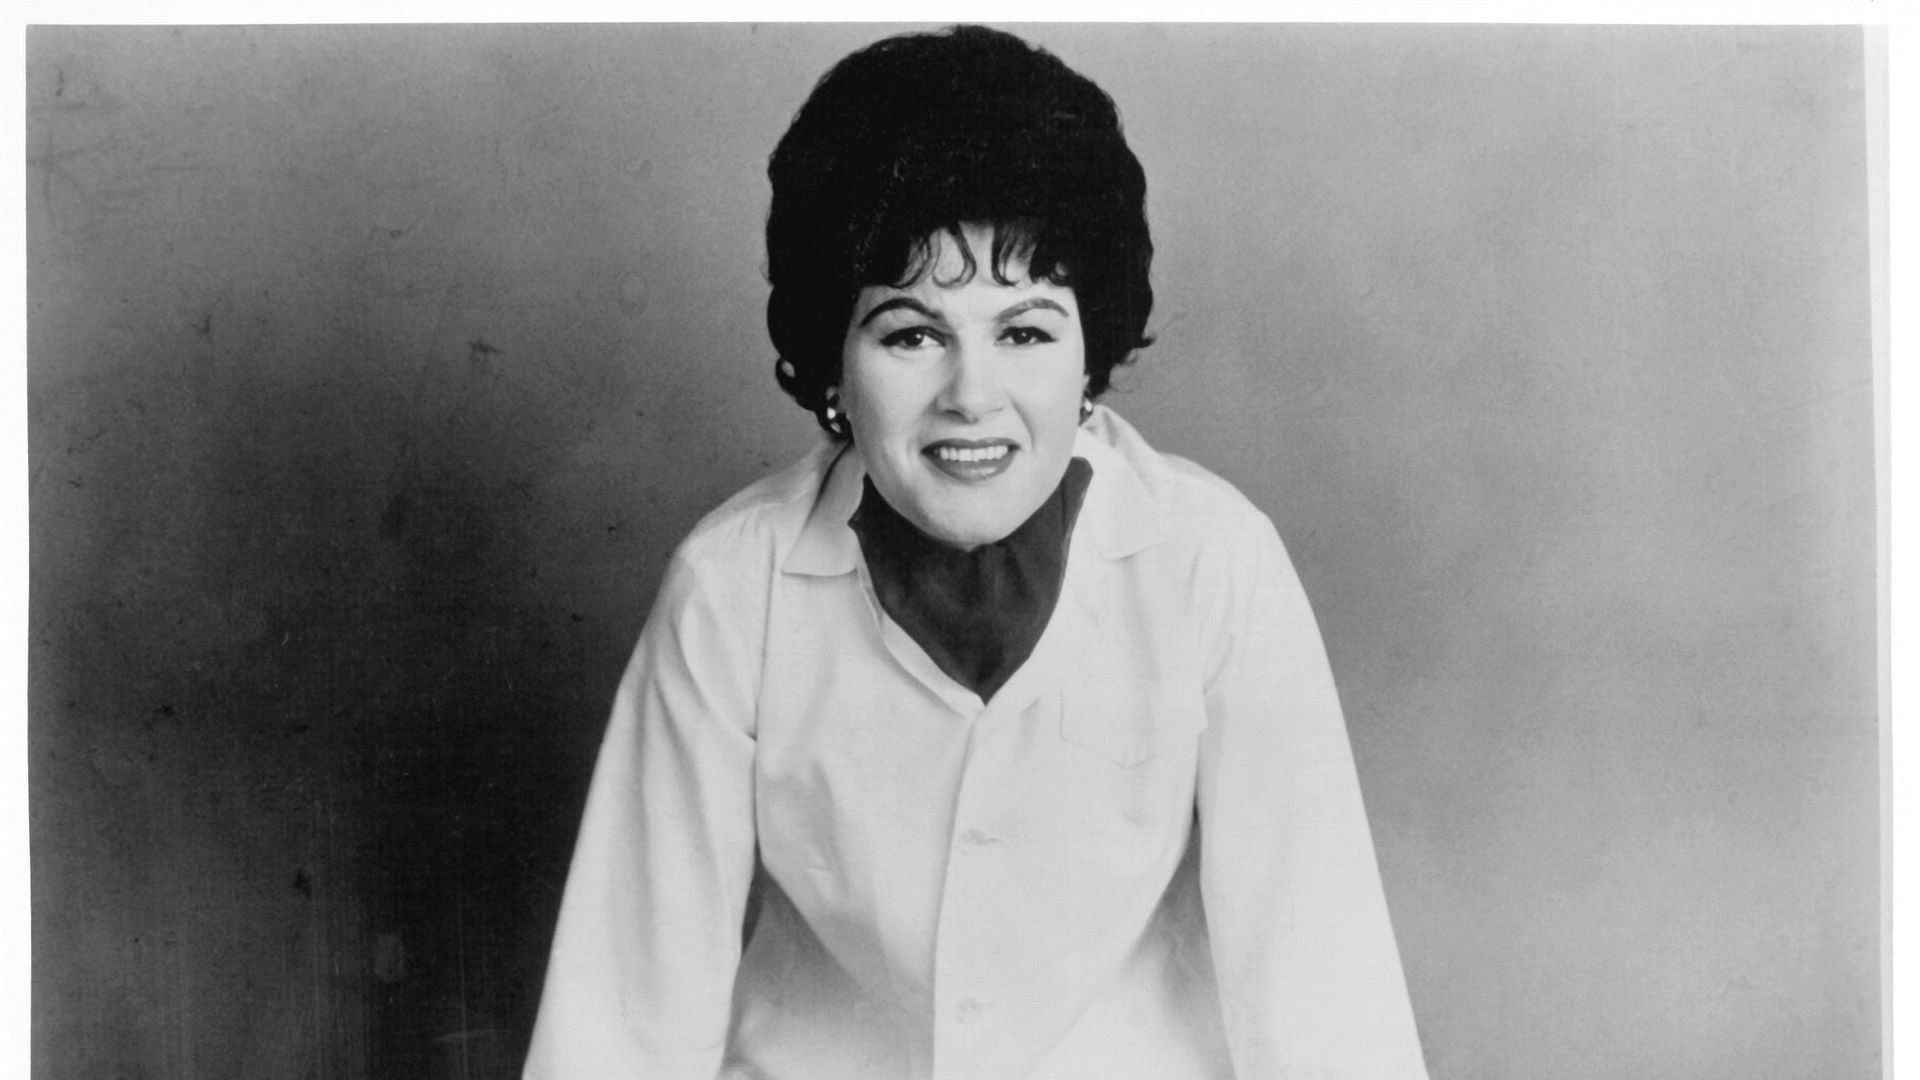 An archival photo of singer Patsy Cline.